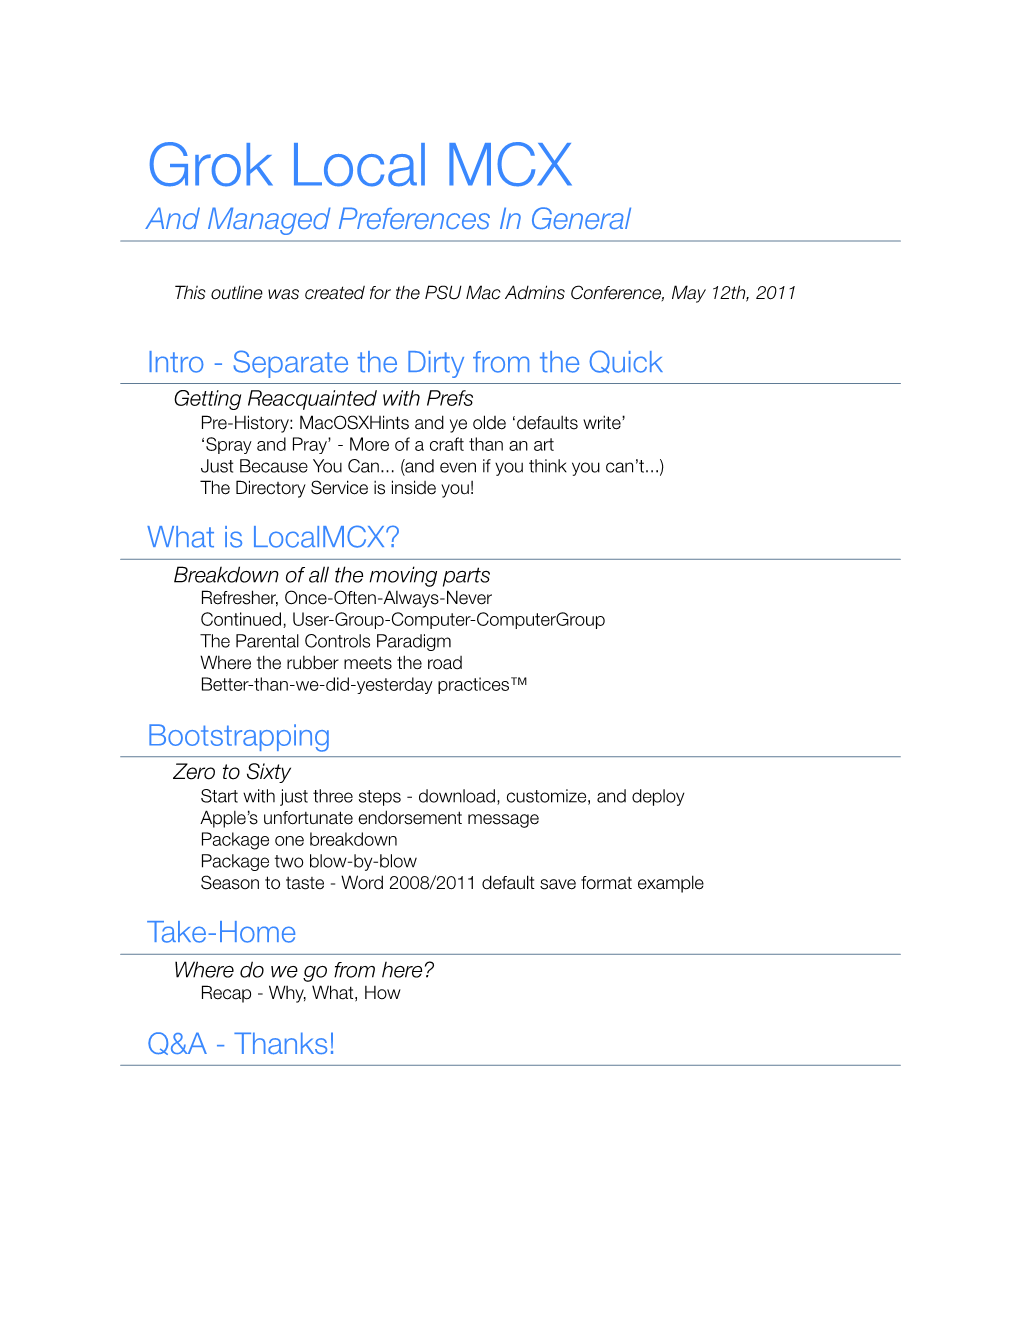 Grok Local MCX and Managed Preferences in General